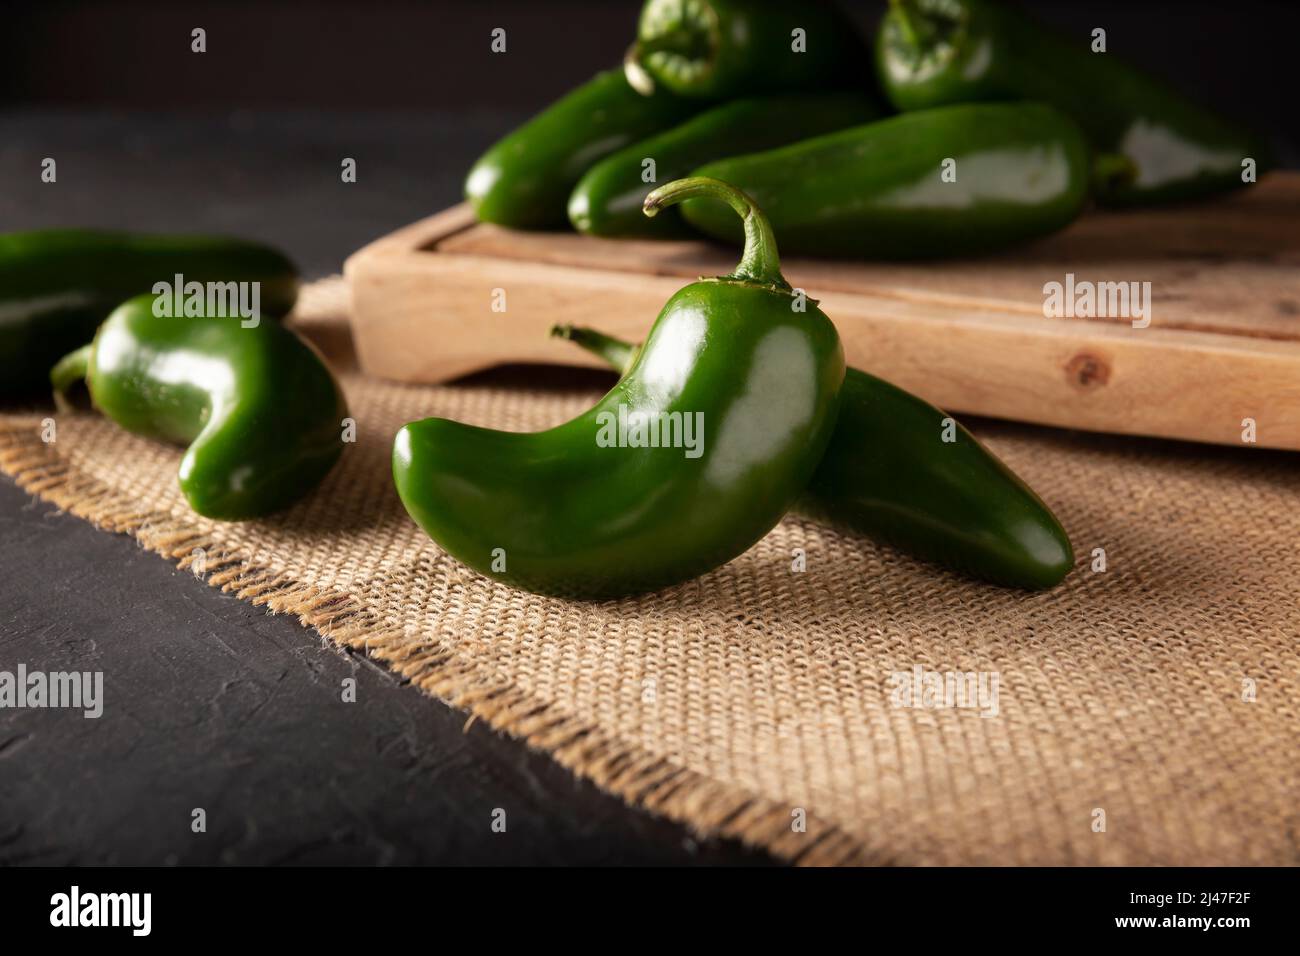 Serrano Chile or Green Chile. (Capsicum annum). Variety of hot chili very popular in Mexican cuisine, it is commonly consumed fresh. Stock Photo